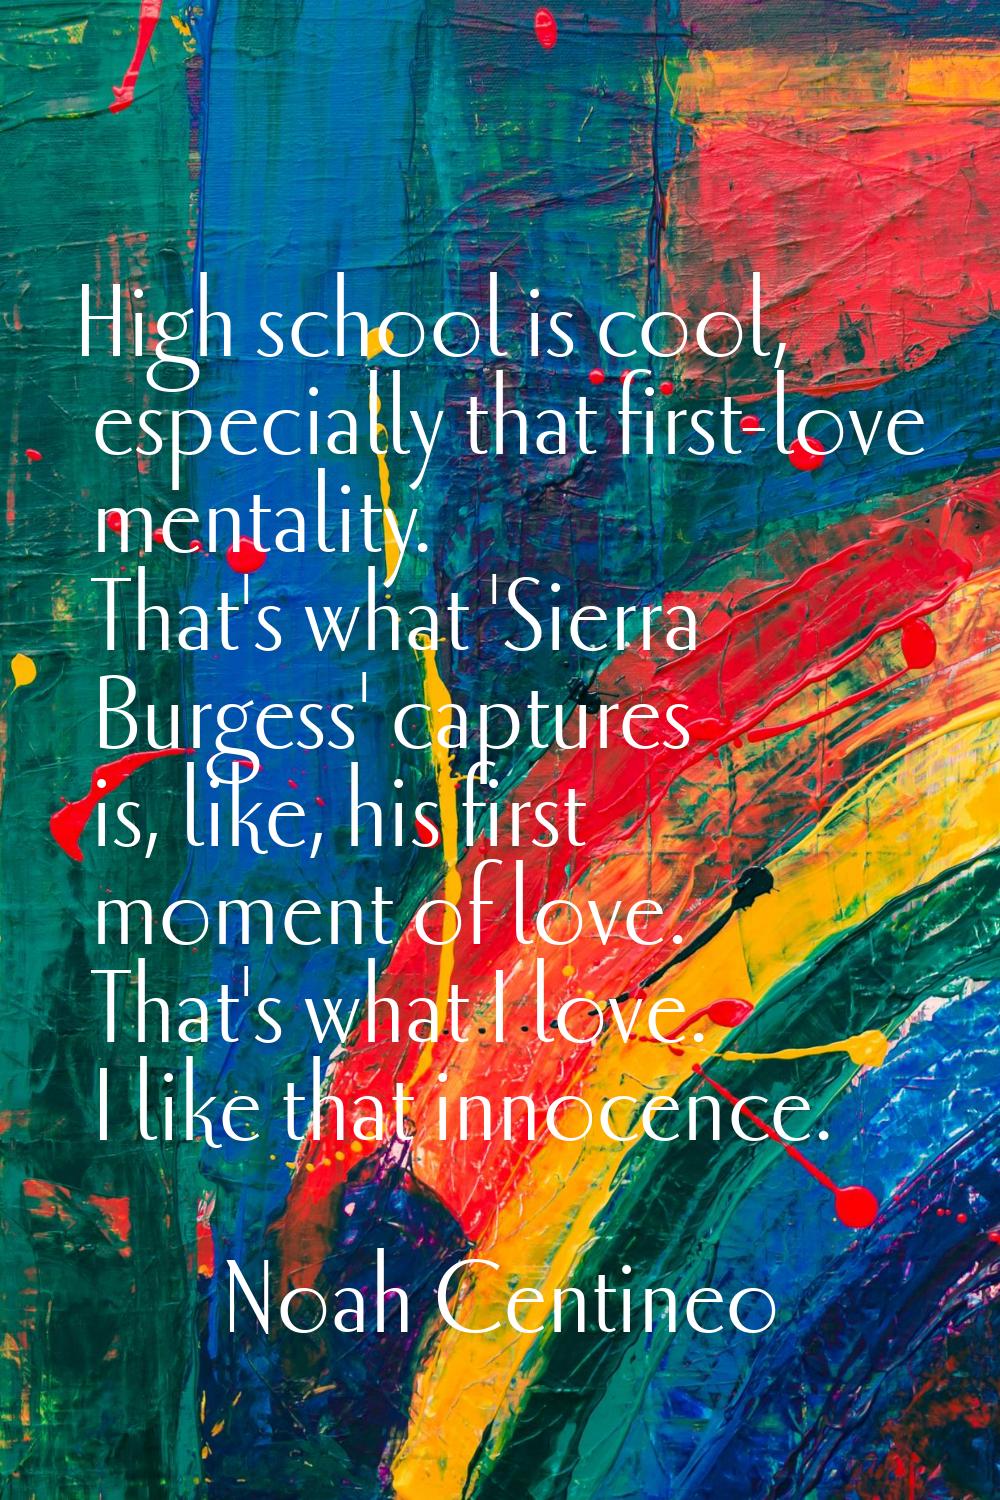 High school is cool, especially that first-love mentality. That's what 'Sierra Burgess' captures is